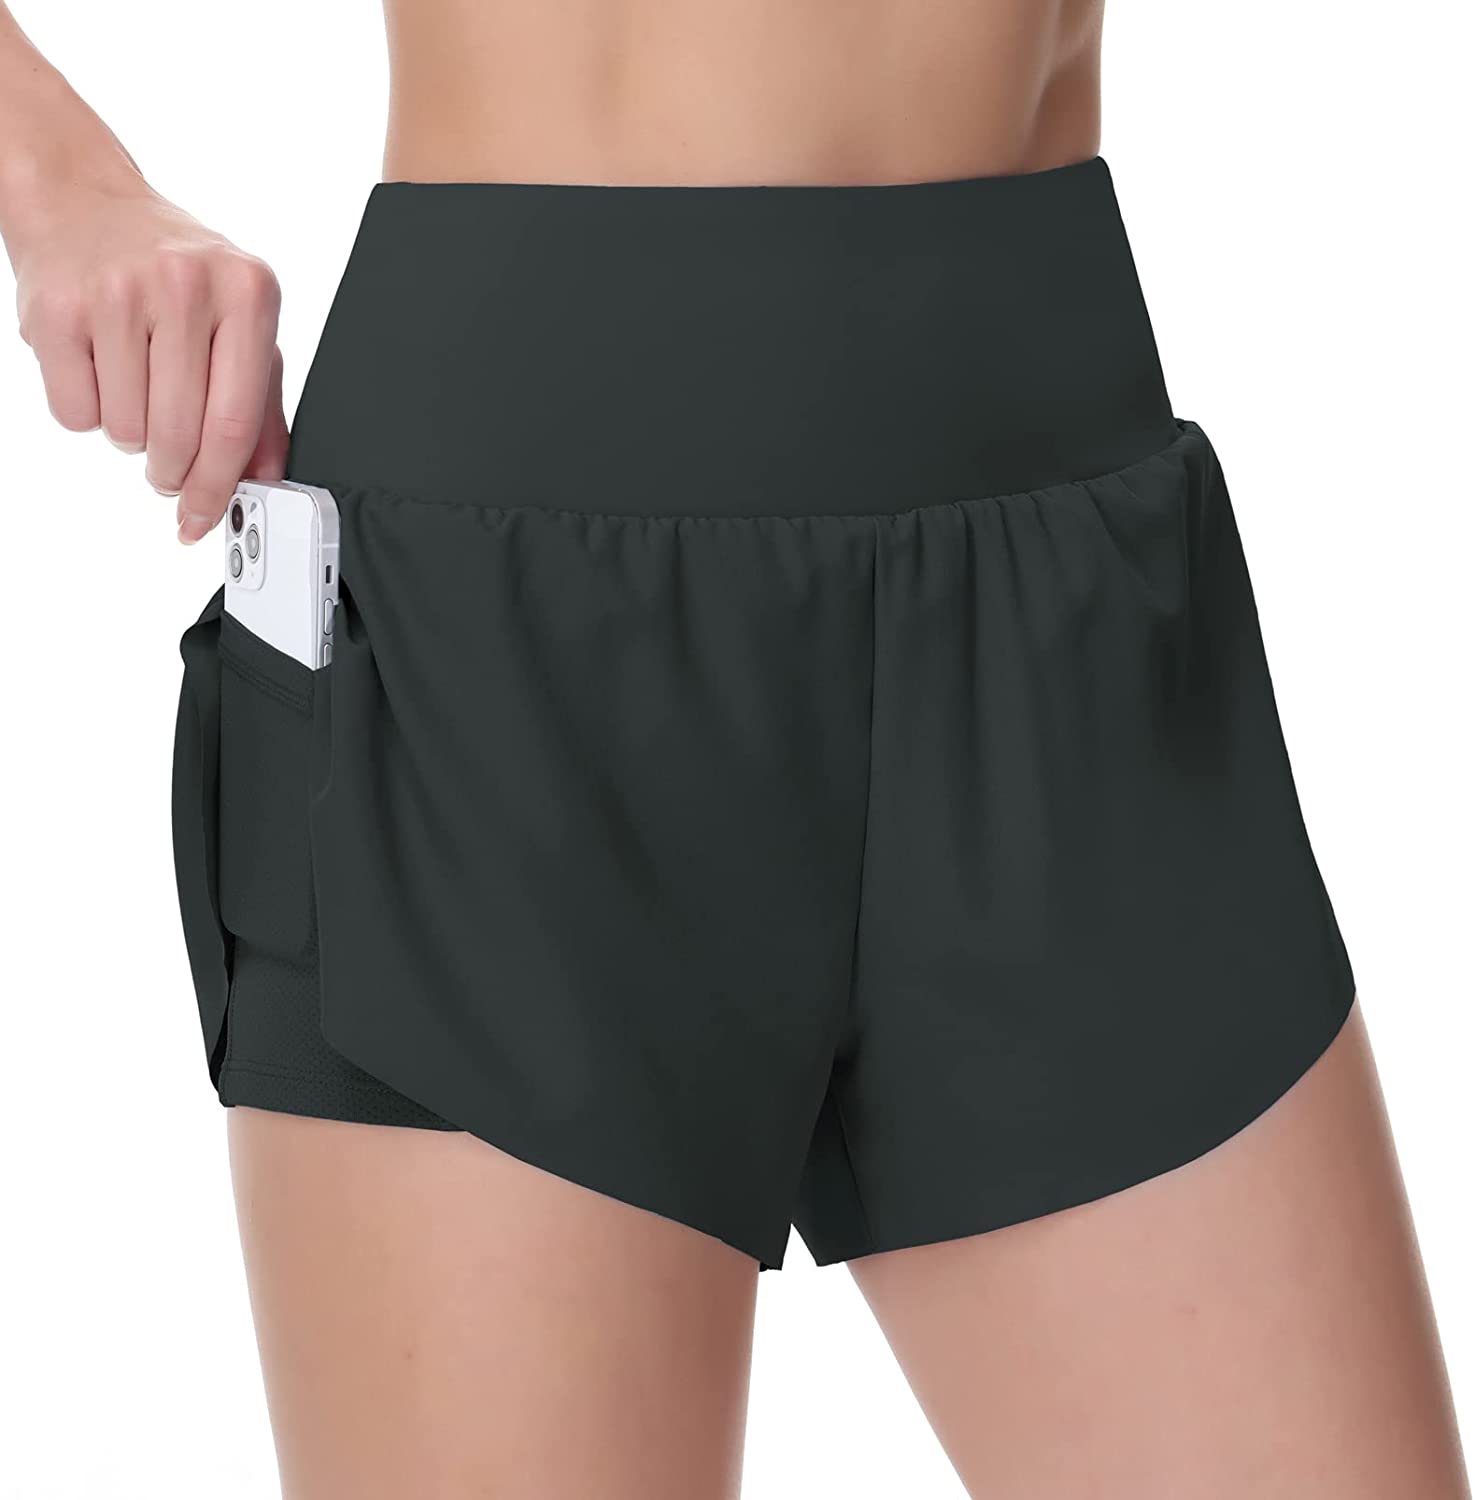 THE GYM PEOPLE Women's Quick Dry Running Shorts Mesh Liner High Waisted  Tennis W